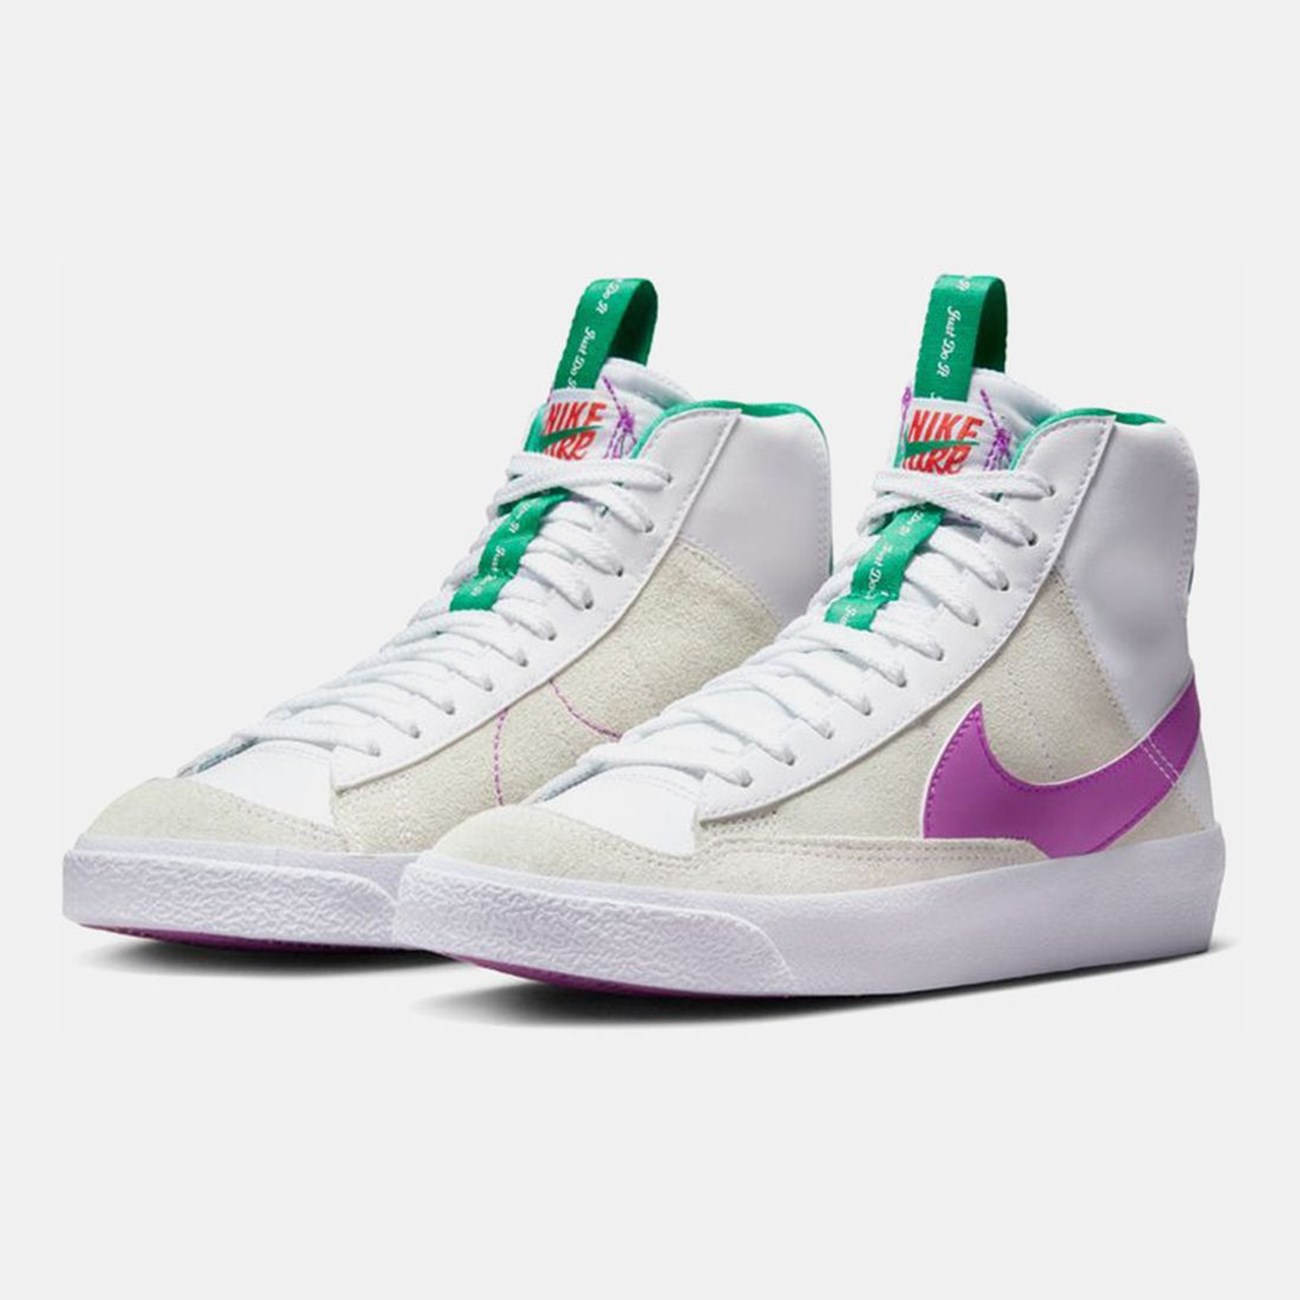 NIKE Blazer Mid ’77 Παιδικά Sneakers DQ6084-101 - The Athlete's Foot